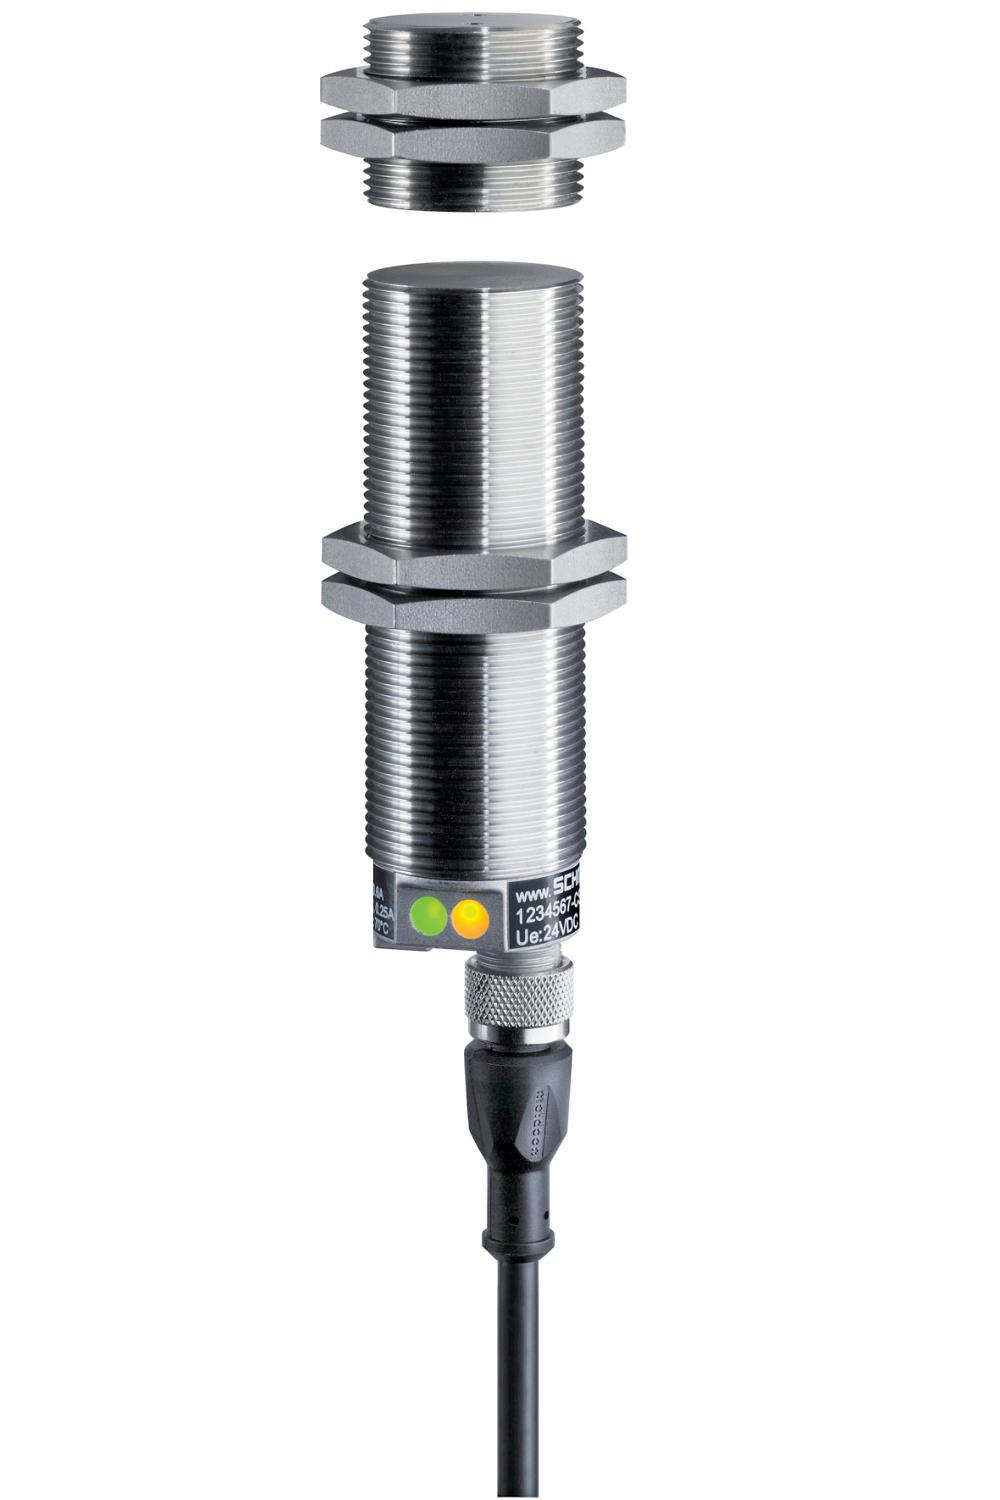 Schmersal CSS 11-30S-D-M-ST Safety sensors; Electronic safety sensors; Stainless steel enclosure; Max. 31 sensors can be wired in series.; Connector M12, 8-pole; Ø M30; High repeat accuracy of the switching points; Max. length of the sensor chain 200 m; 2 short-circuit proof PNP saf